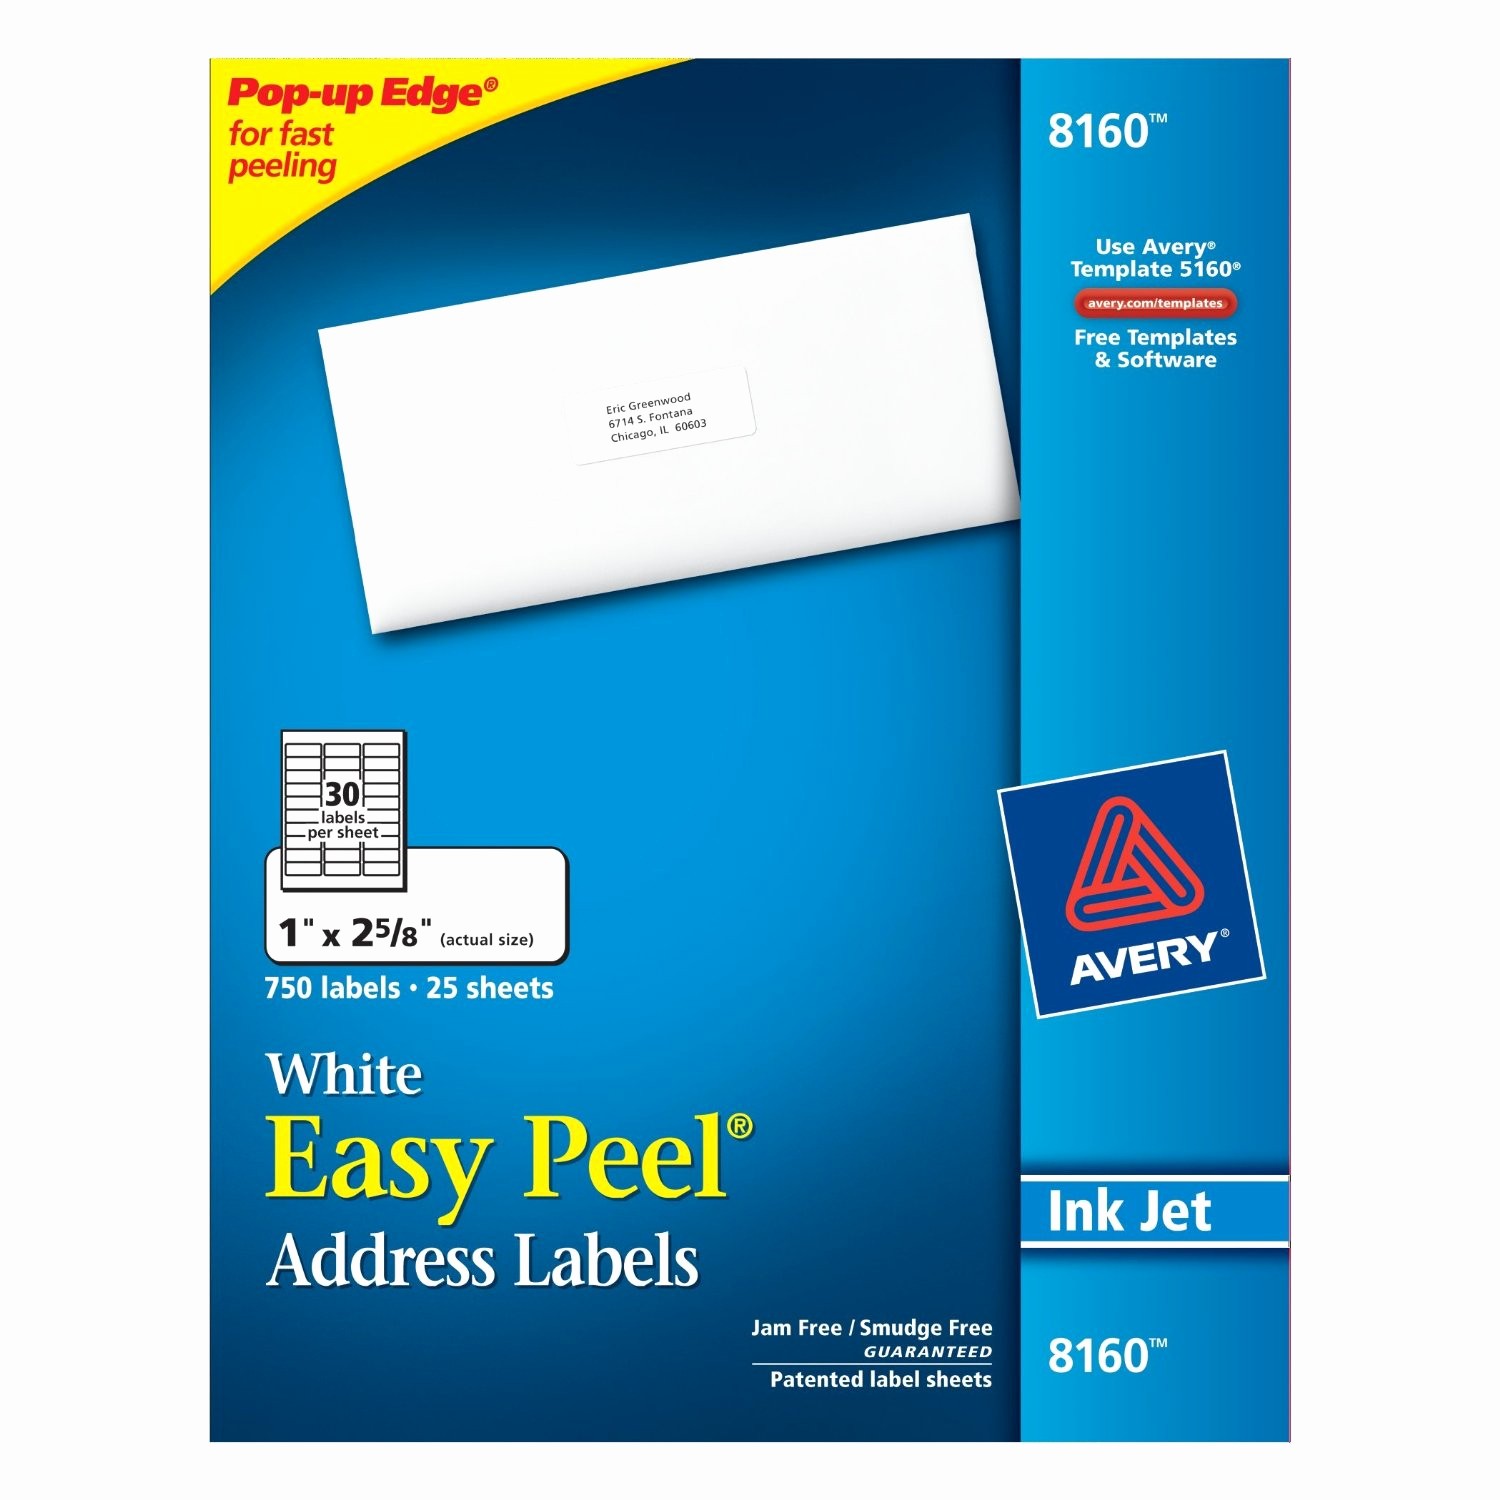 Avery 8 Labels Per Sheet Awesome Avery Easy Peel Address Labels Inkjet Printers White